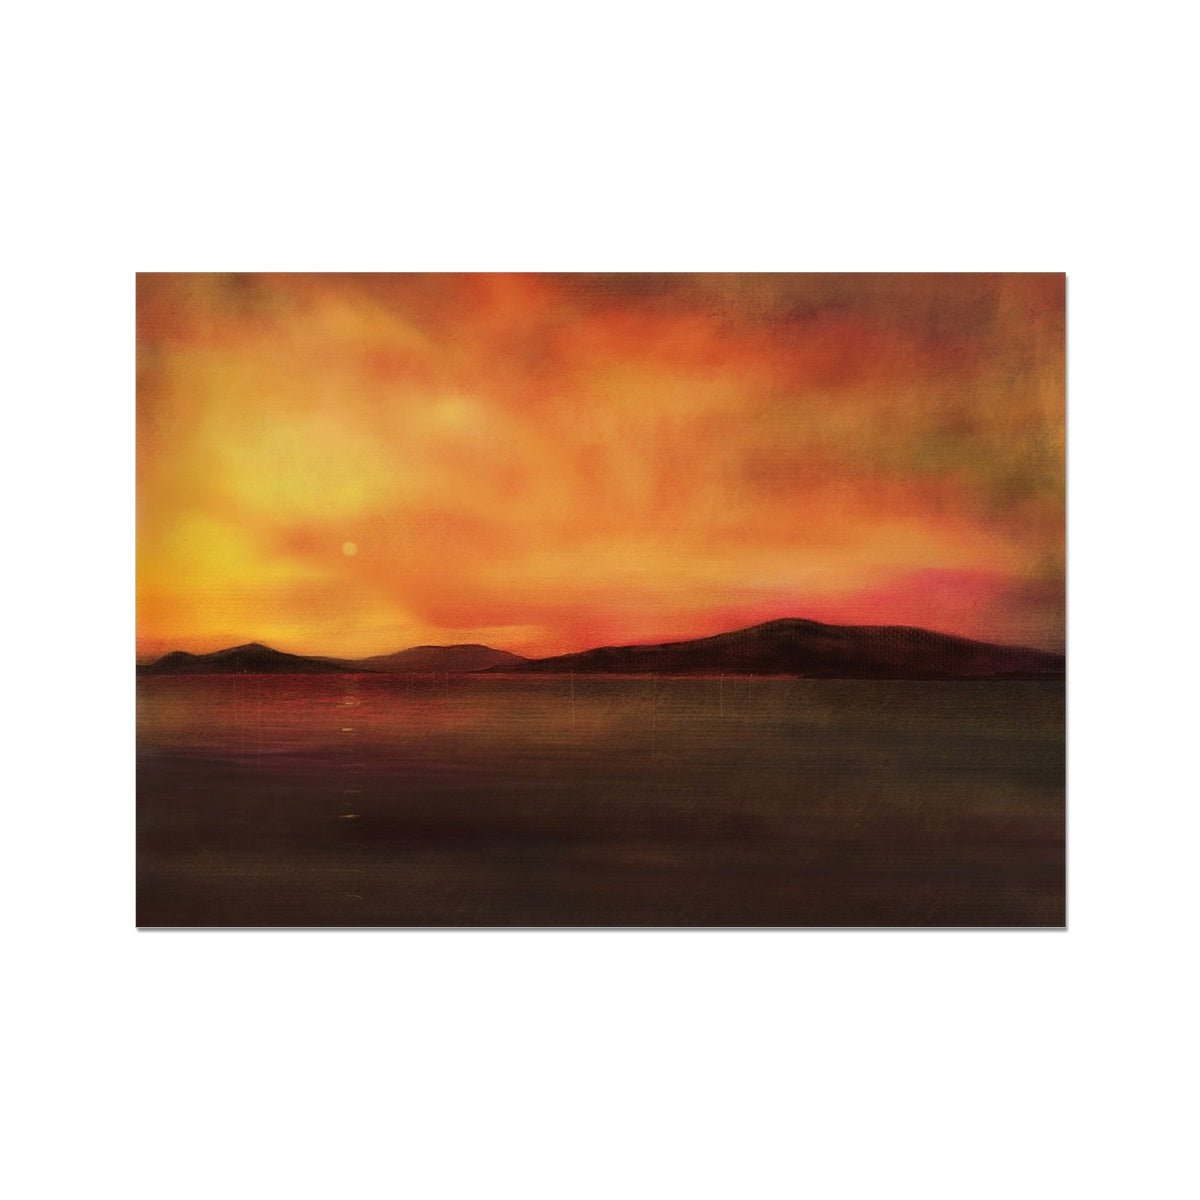 Isle Of Harris Sunset Painting | Fine Art Prints From Scotland-Unframed Prints-Hebridean Islands Art Gallery-A2 Landscape-Paintings, Prints, Homeware, Art Gifts From Scotland By Scottish Artist Kevin Hunter